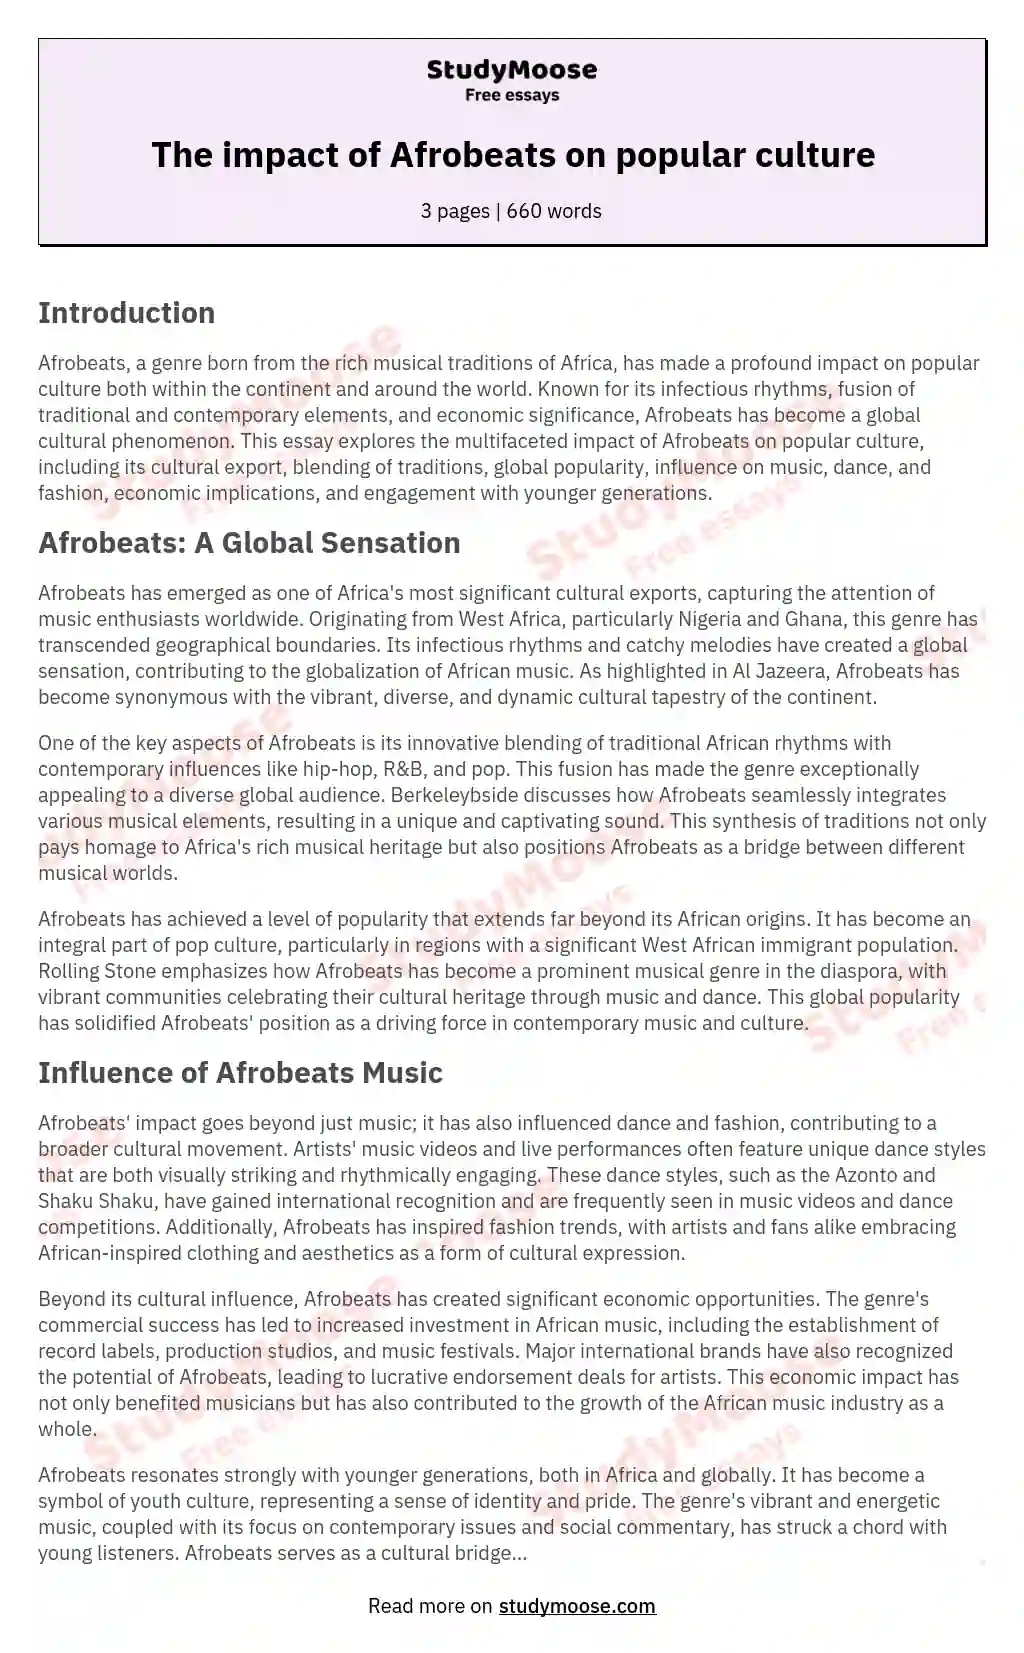 The impact of Afrobeats on popular culture essay